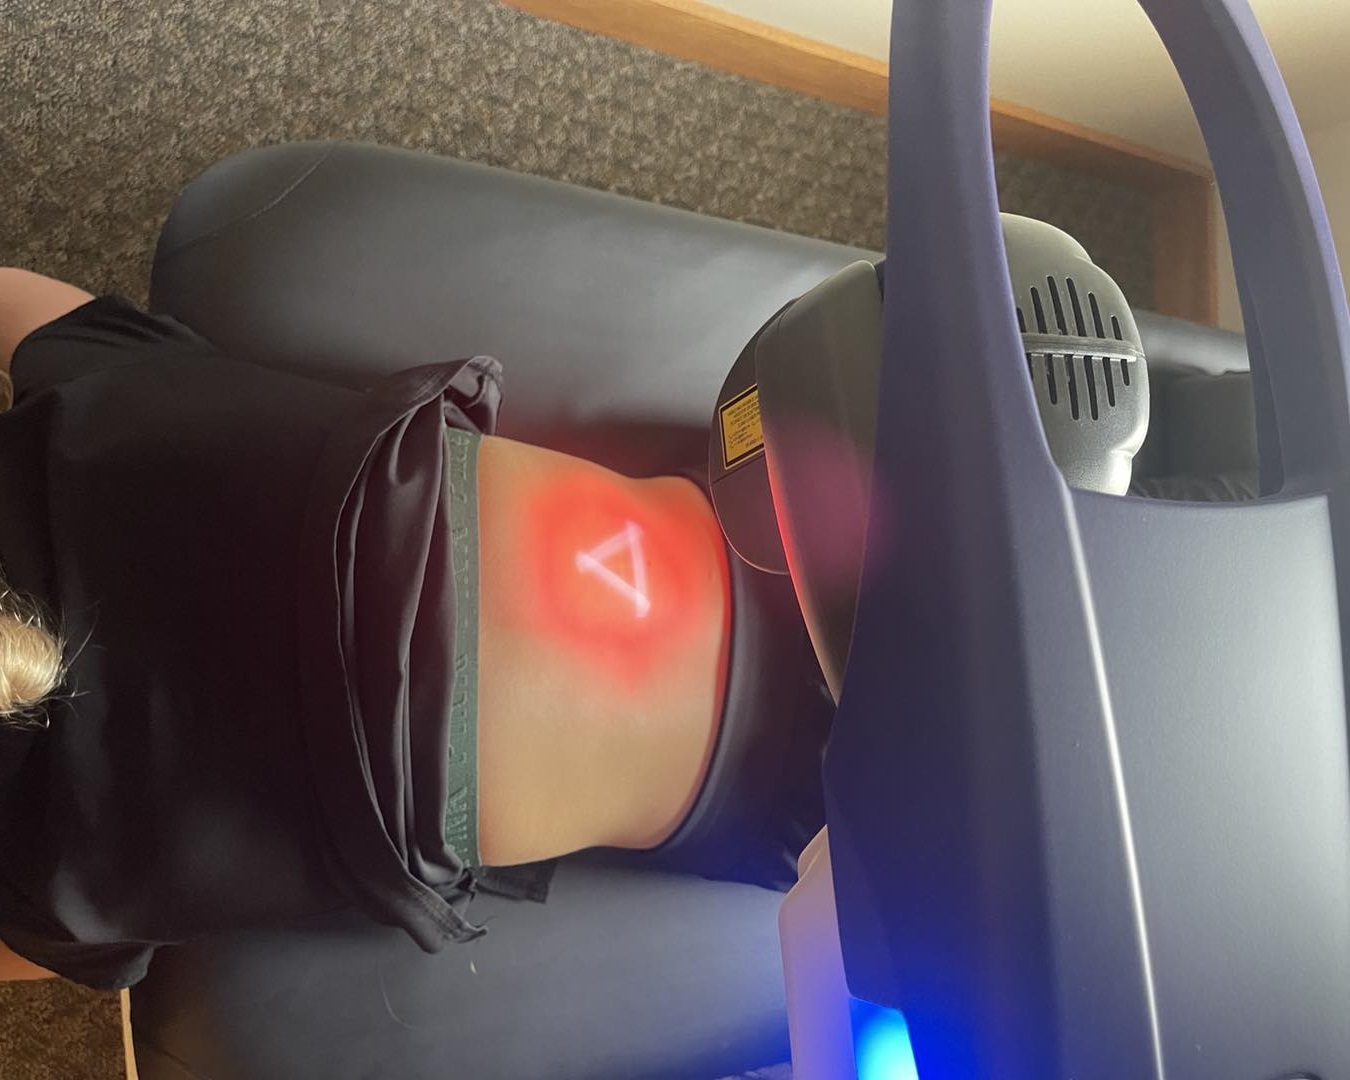 Squires Chiropractic - M6 laser device